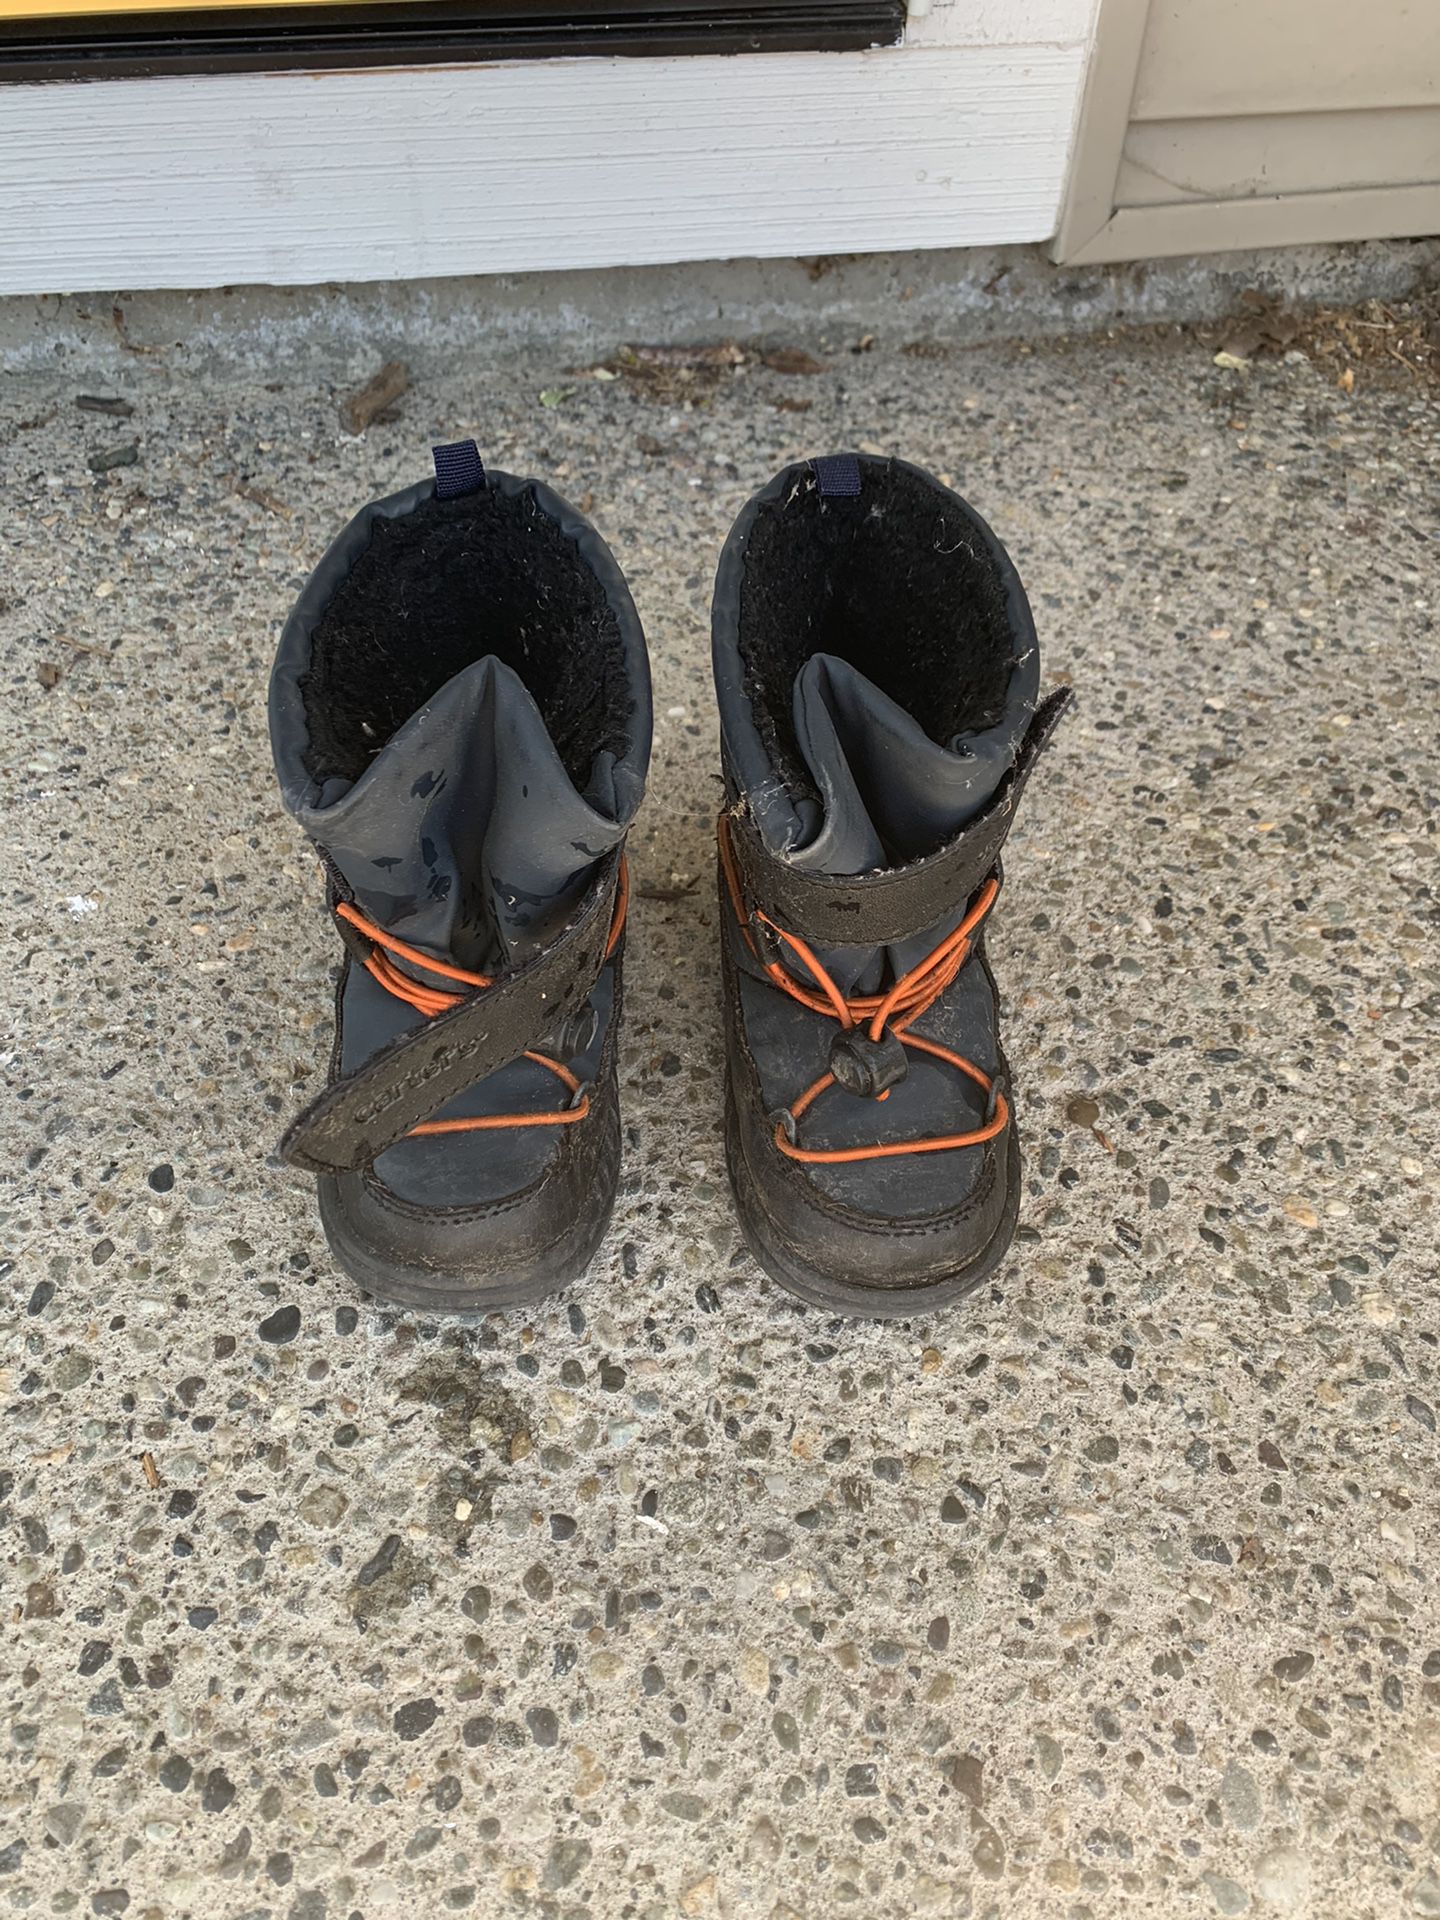 Toddler Size 10 Snow Boots